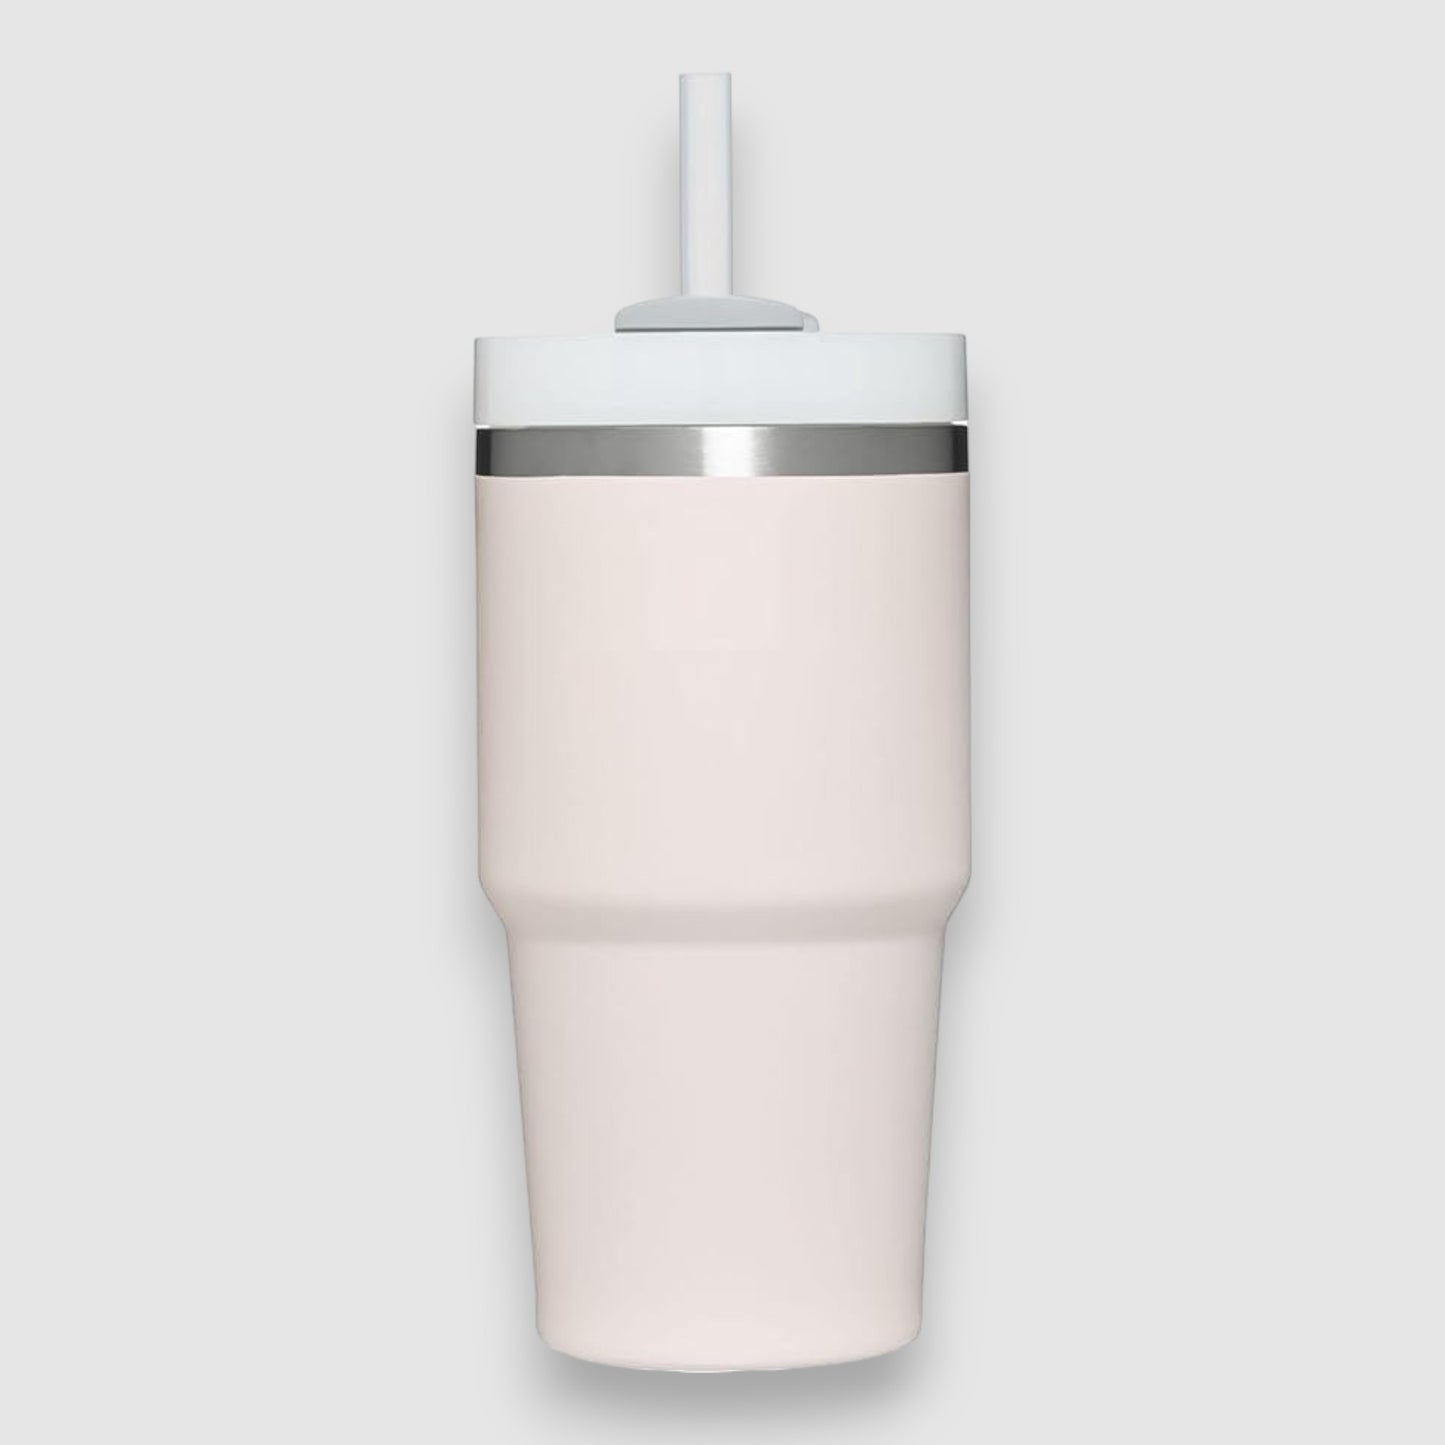 Verve — 600ml Handy Tumbler With Lid and Straws, Suitable For Travel